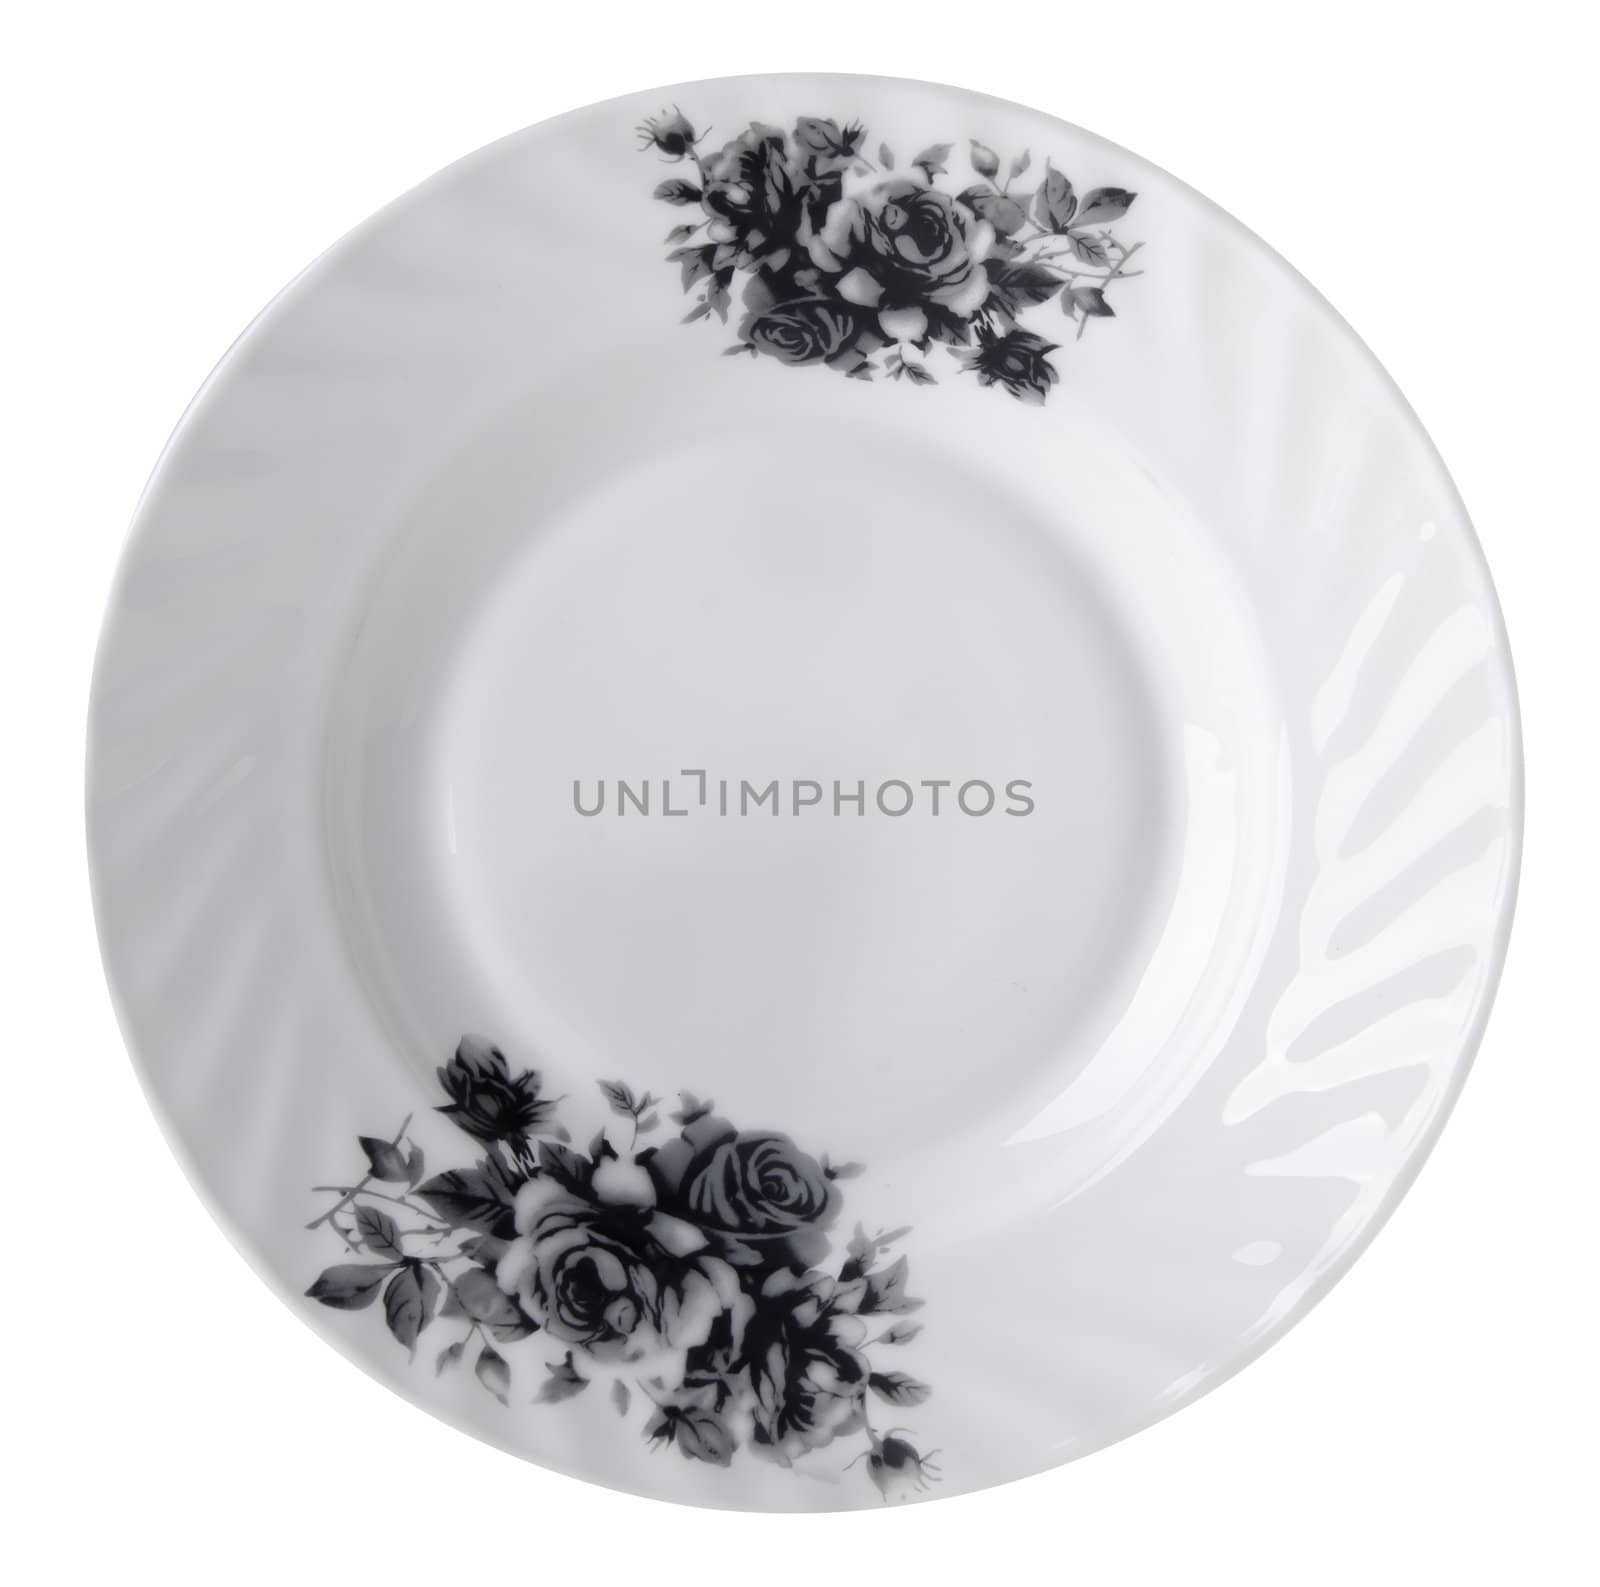 plates on the white background